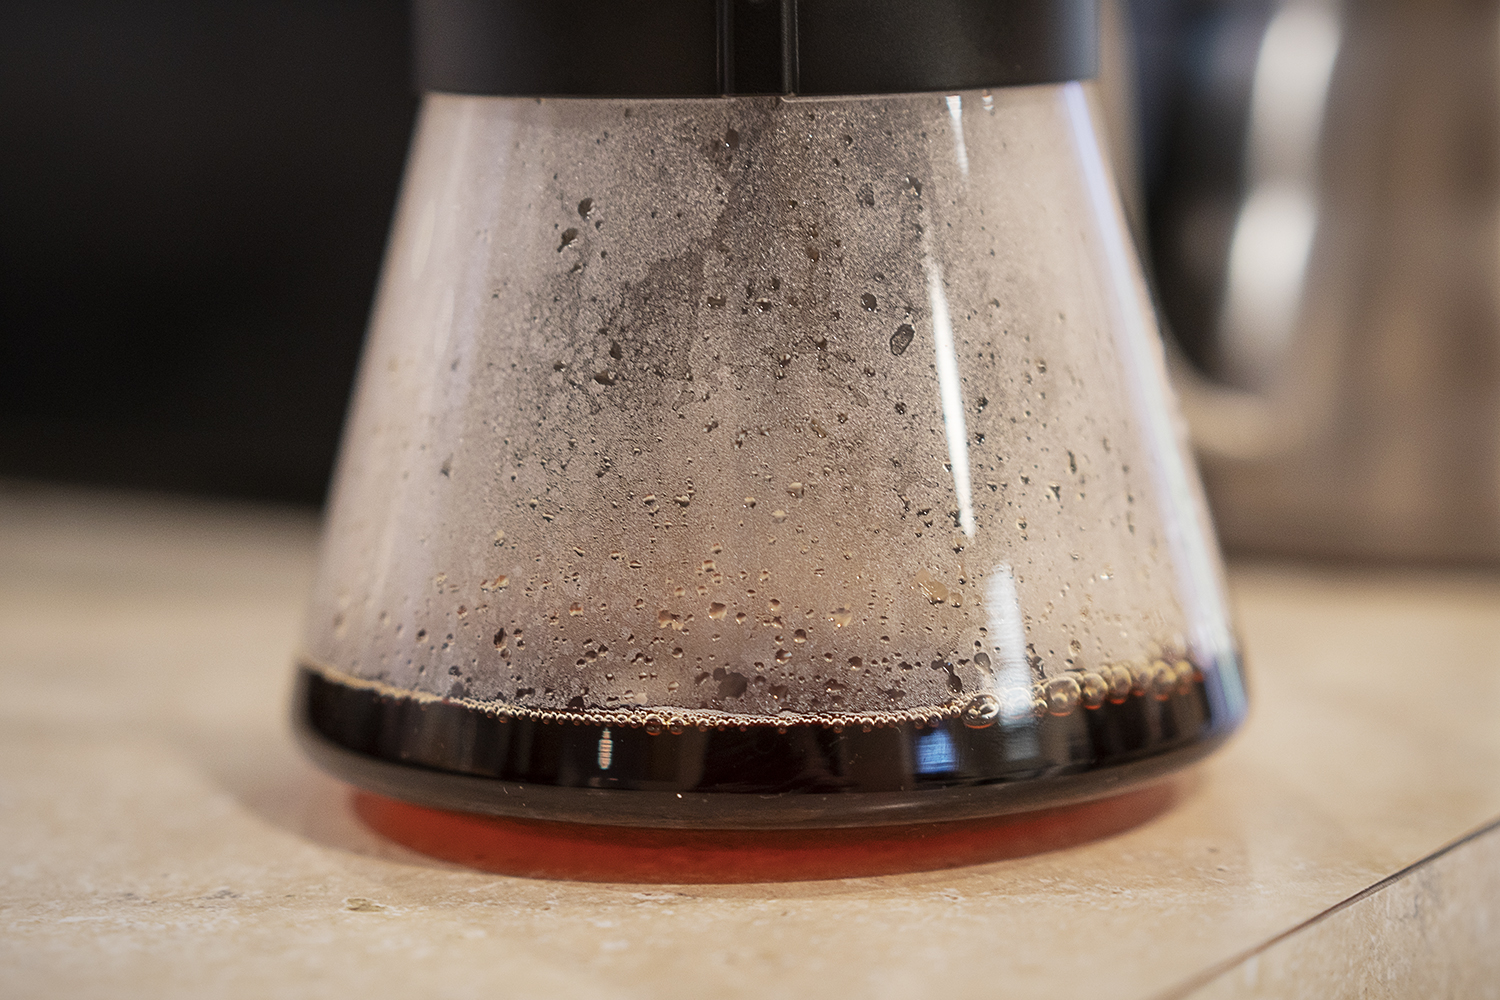 Flint, MI - Friday, June 15, 2018: Freshly brewed coffee drips into a carafe at Chill Coffee Cafe.